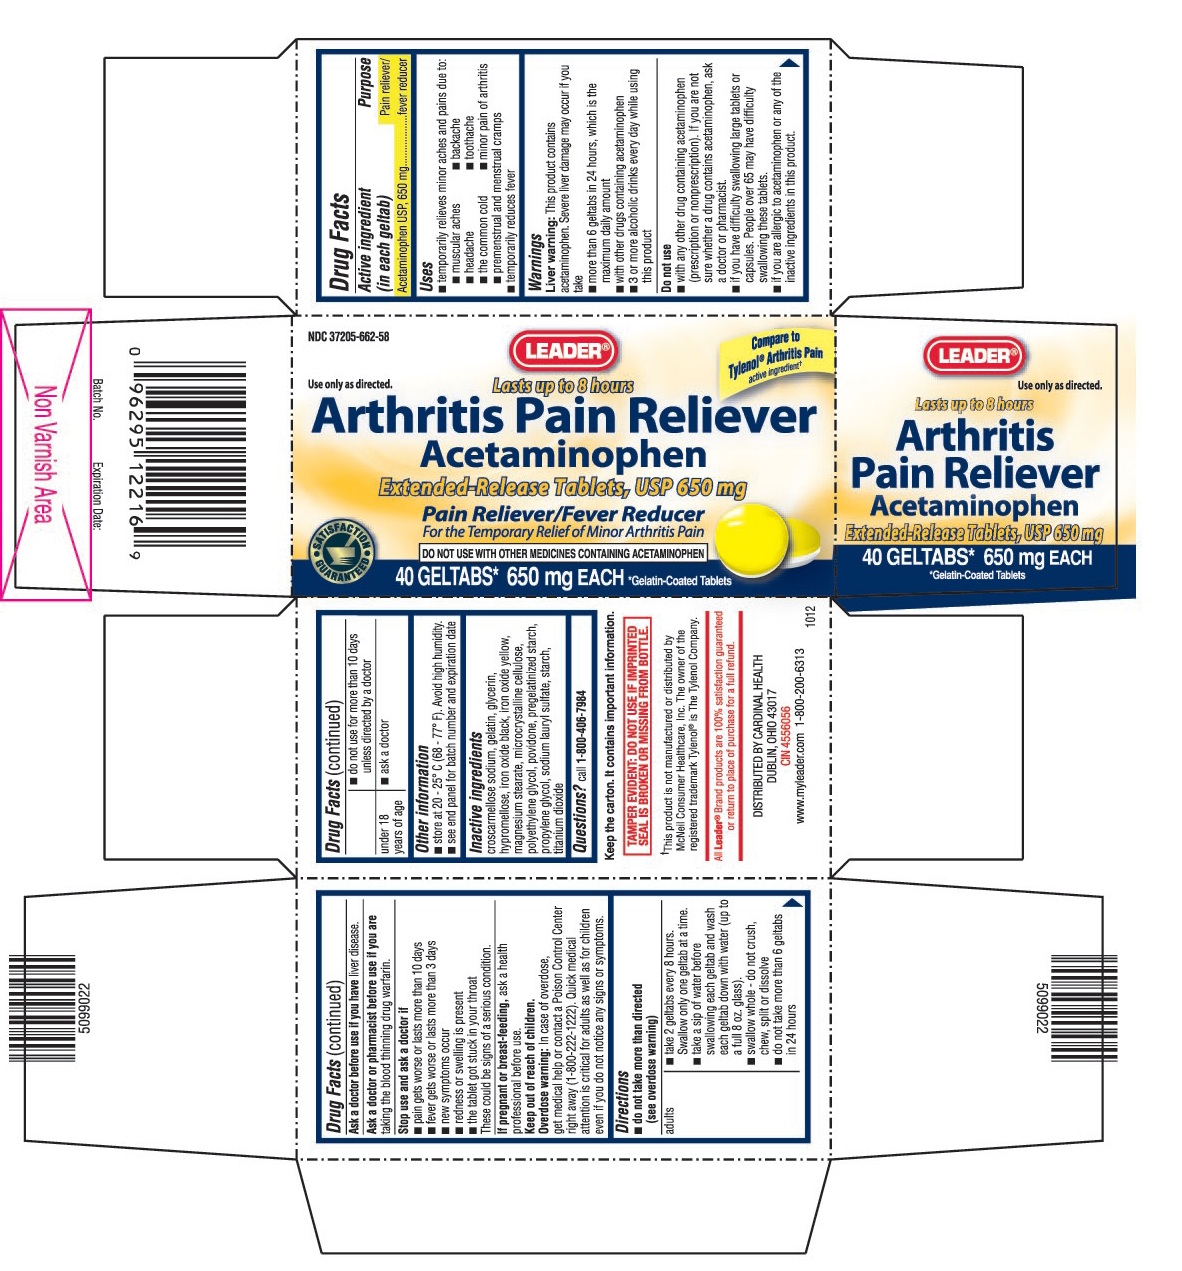 This is the 40 count bottle carton label for Leader Acetaminophen extended-release tablets, USP 650 mg (geltabs).